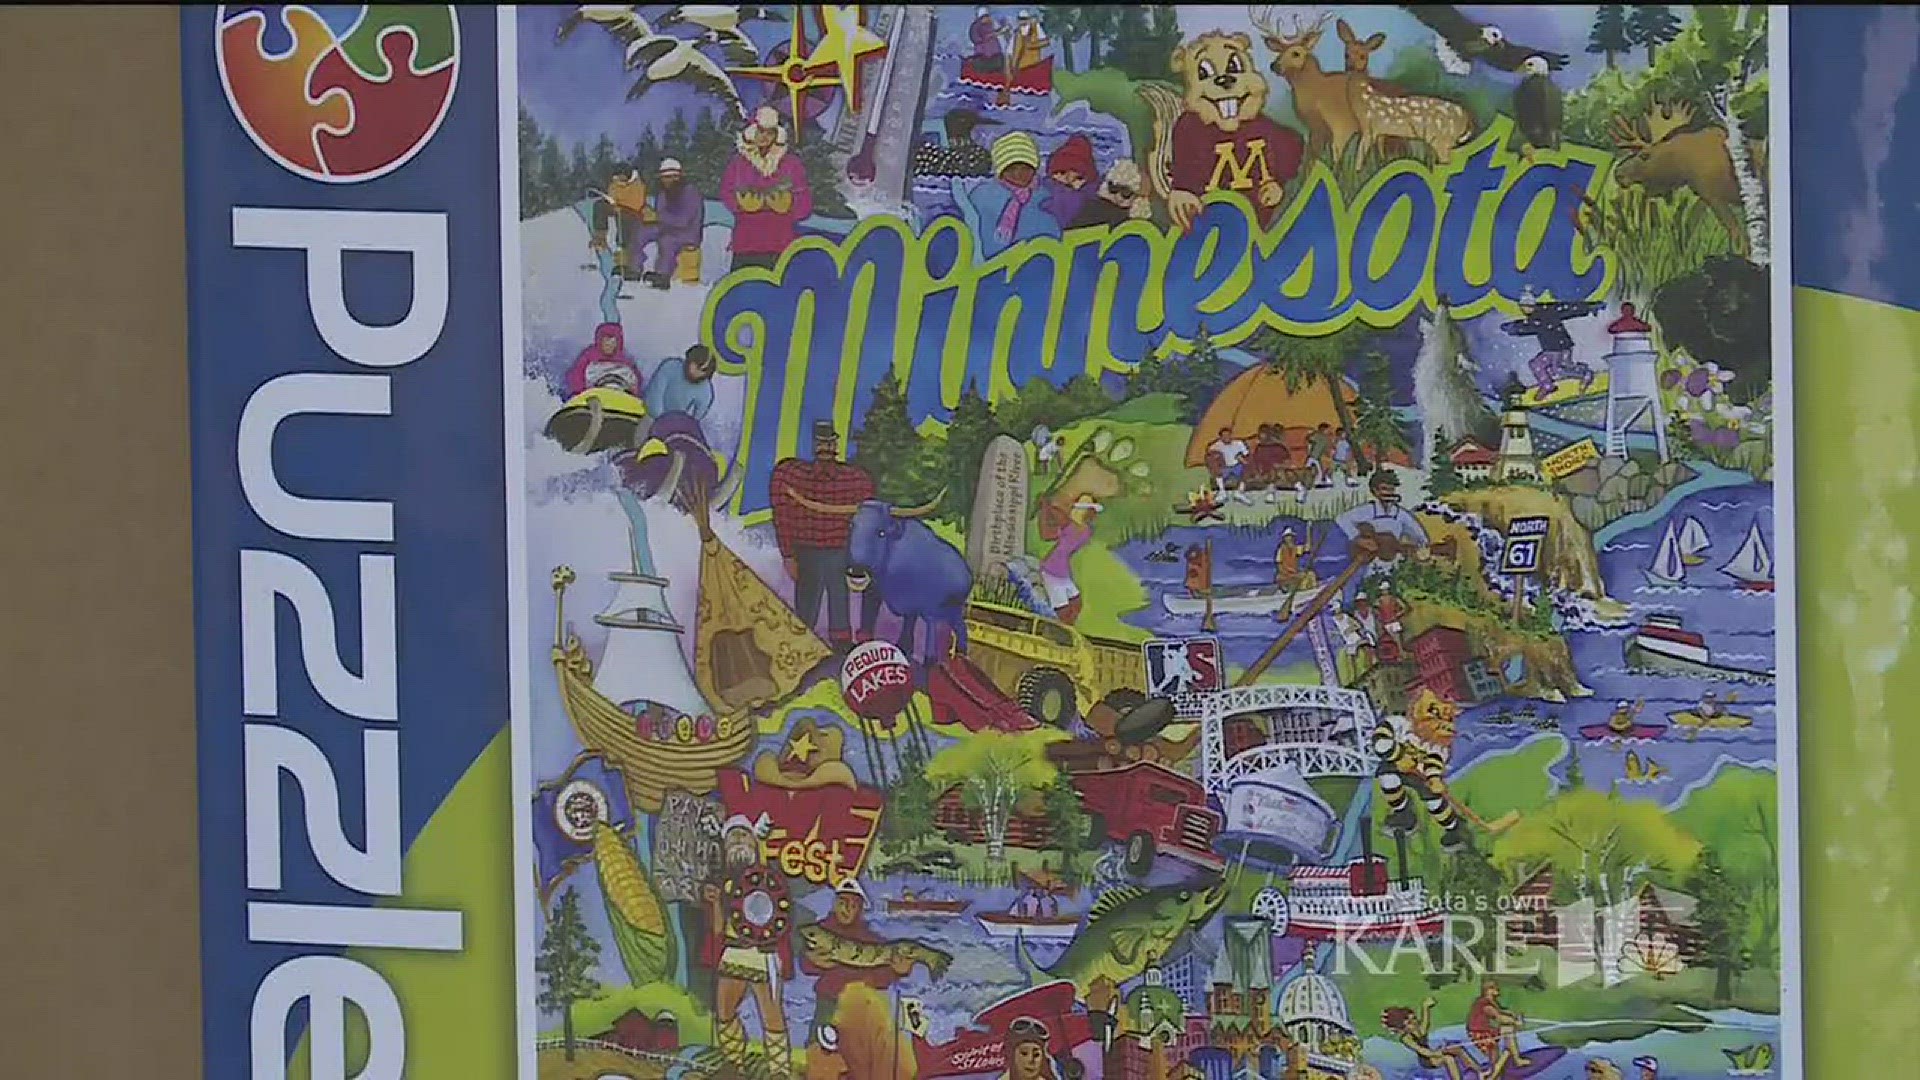 A Minnesota couple's business has created a twist in the puzzling world.